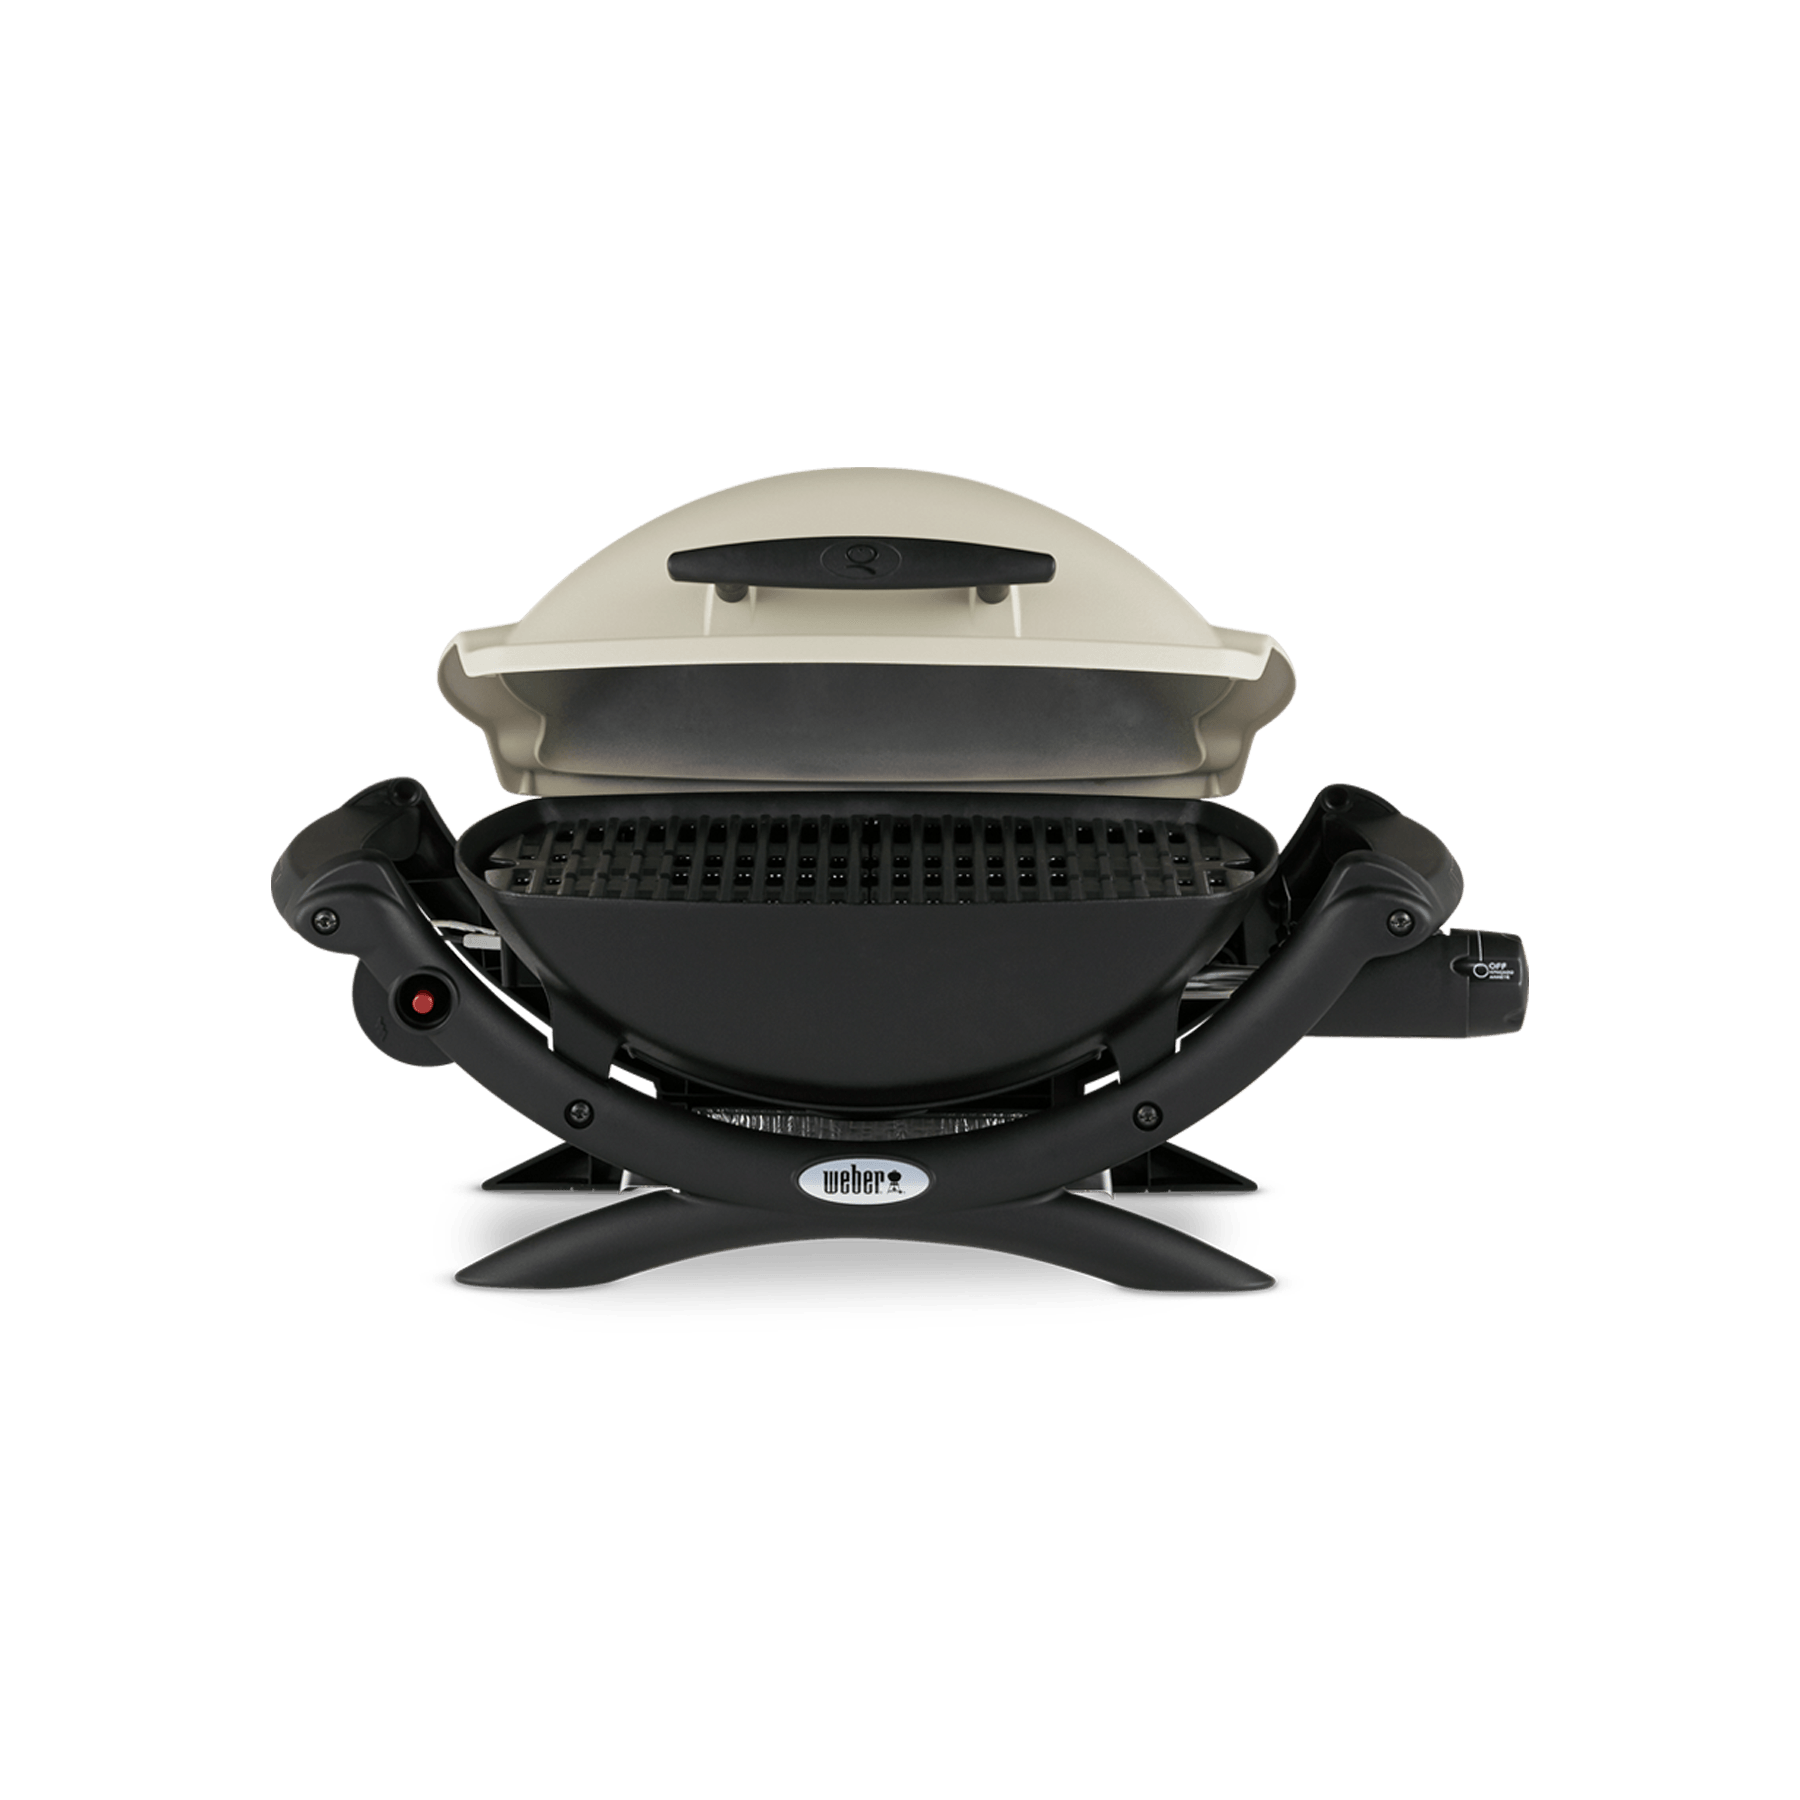 BBQ Weber Q1000 Portable Gas Barbecue Grill Stainless Steel Burner & Hose Baby Q 